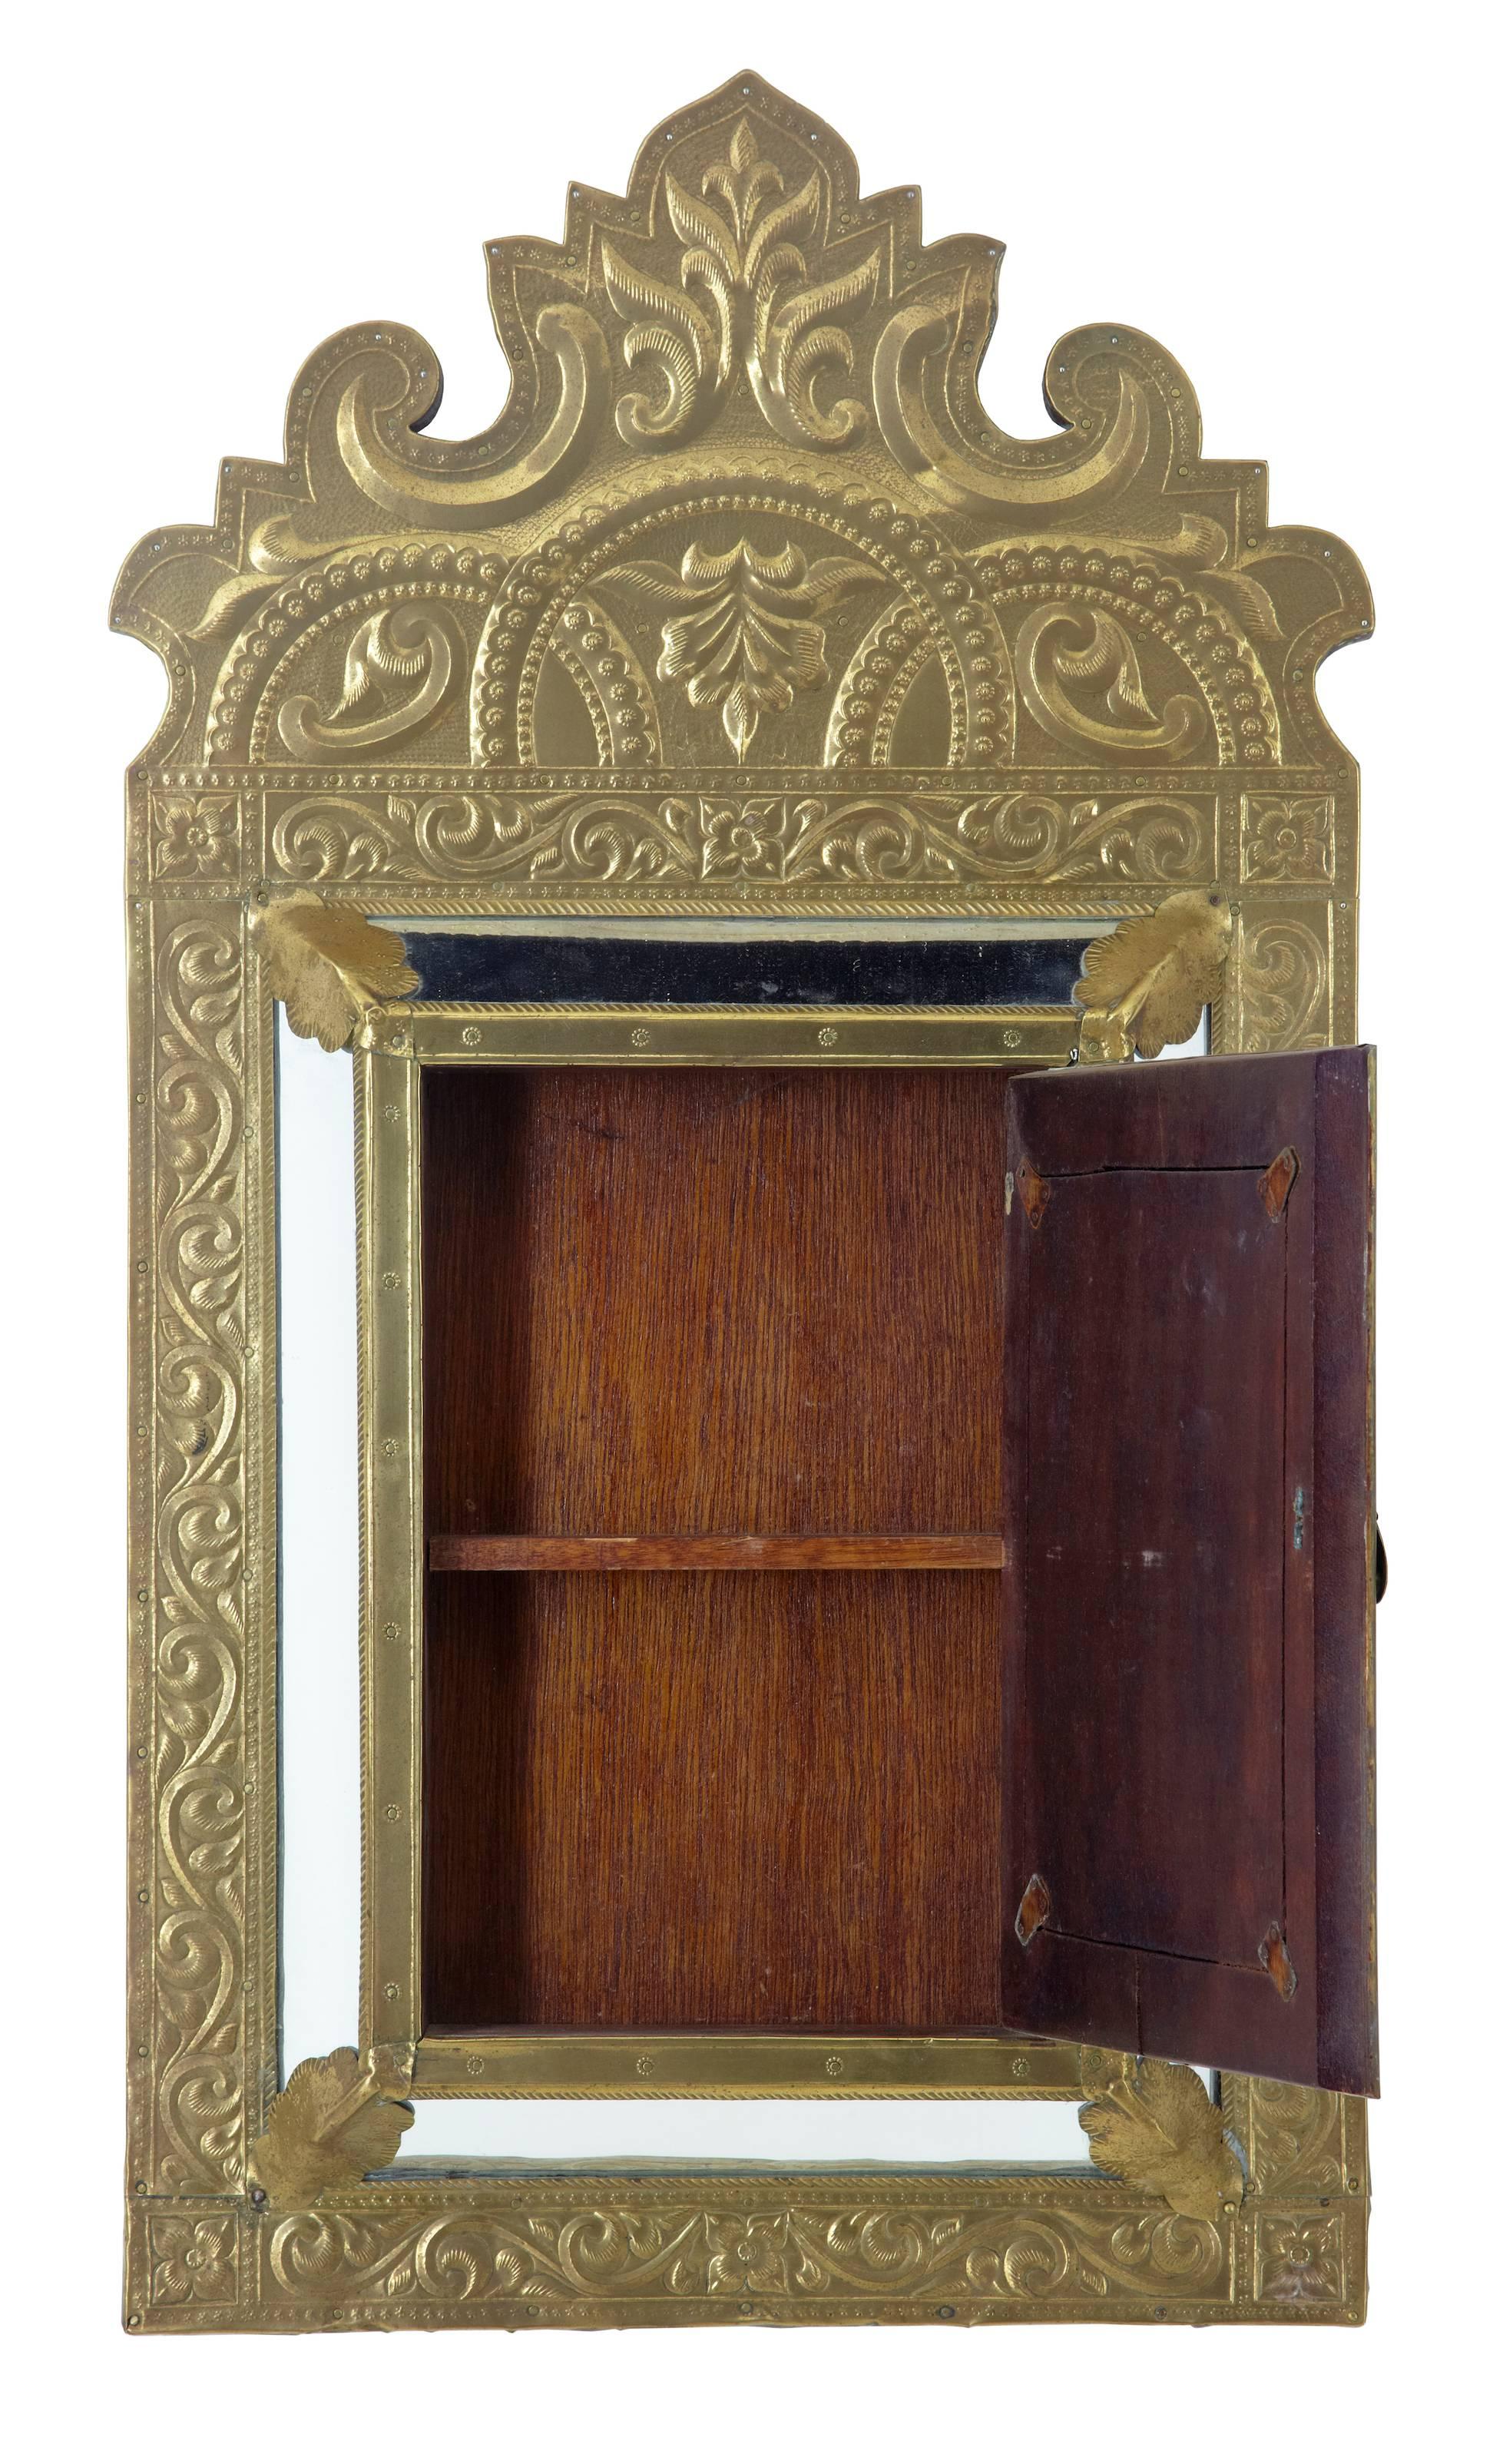 Good quality Art Nouveau brass mirrored cabinet, circa 1890.
Small central mirrored door opens to reveal a small interior with one shelf. Ideal for a key cupboard or medicine cabinet.

Measures: Height 25